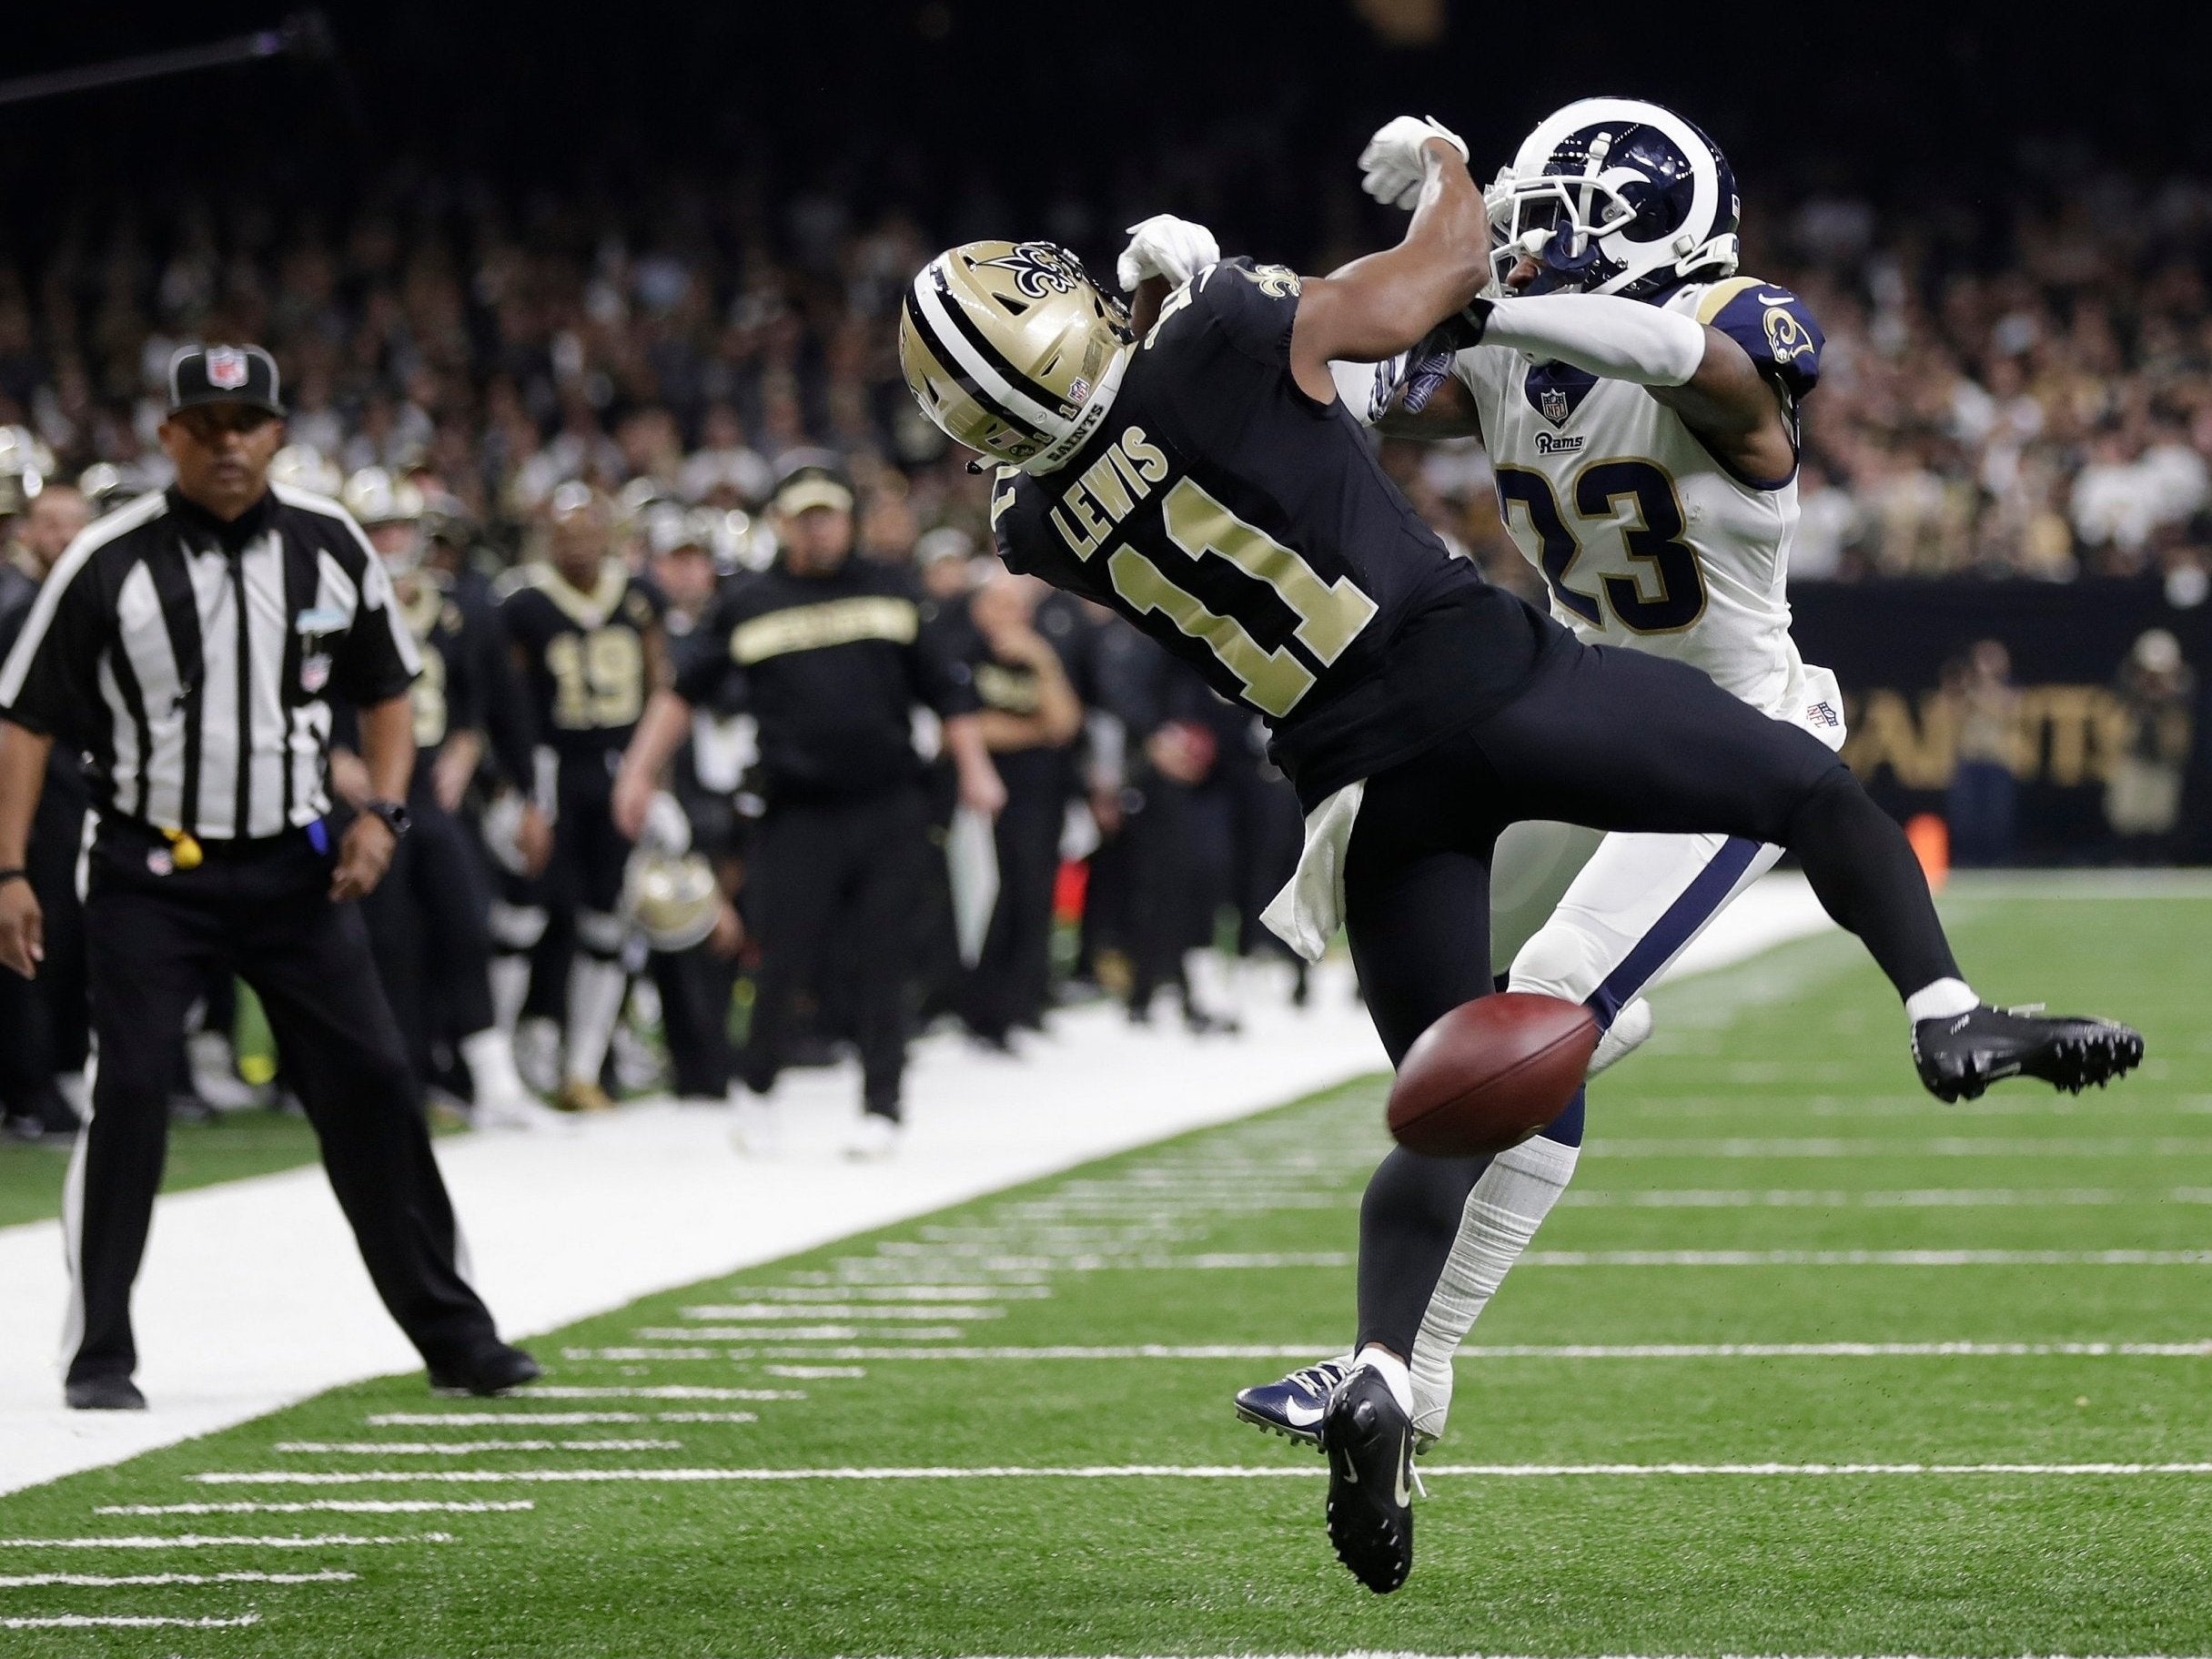 The late non-call cost the Saints a place in the Super Bowl